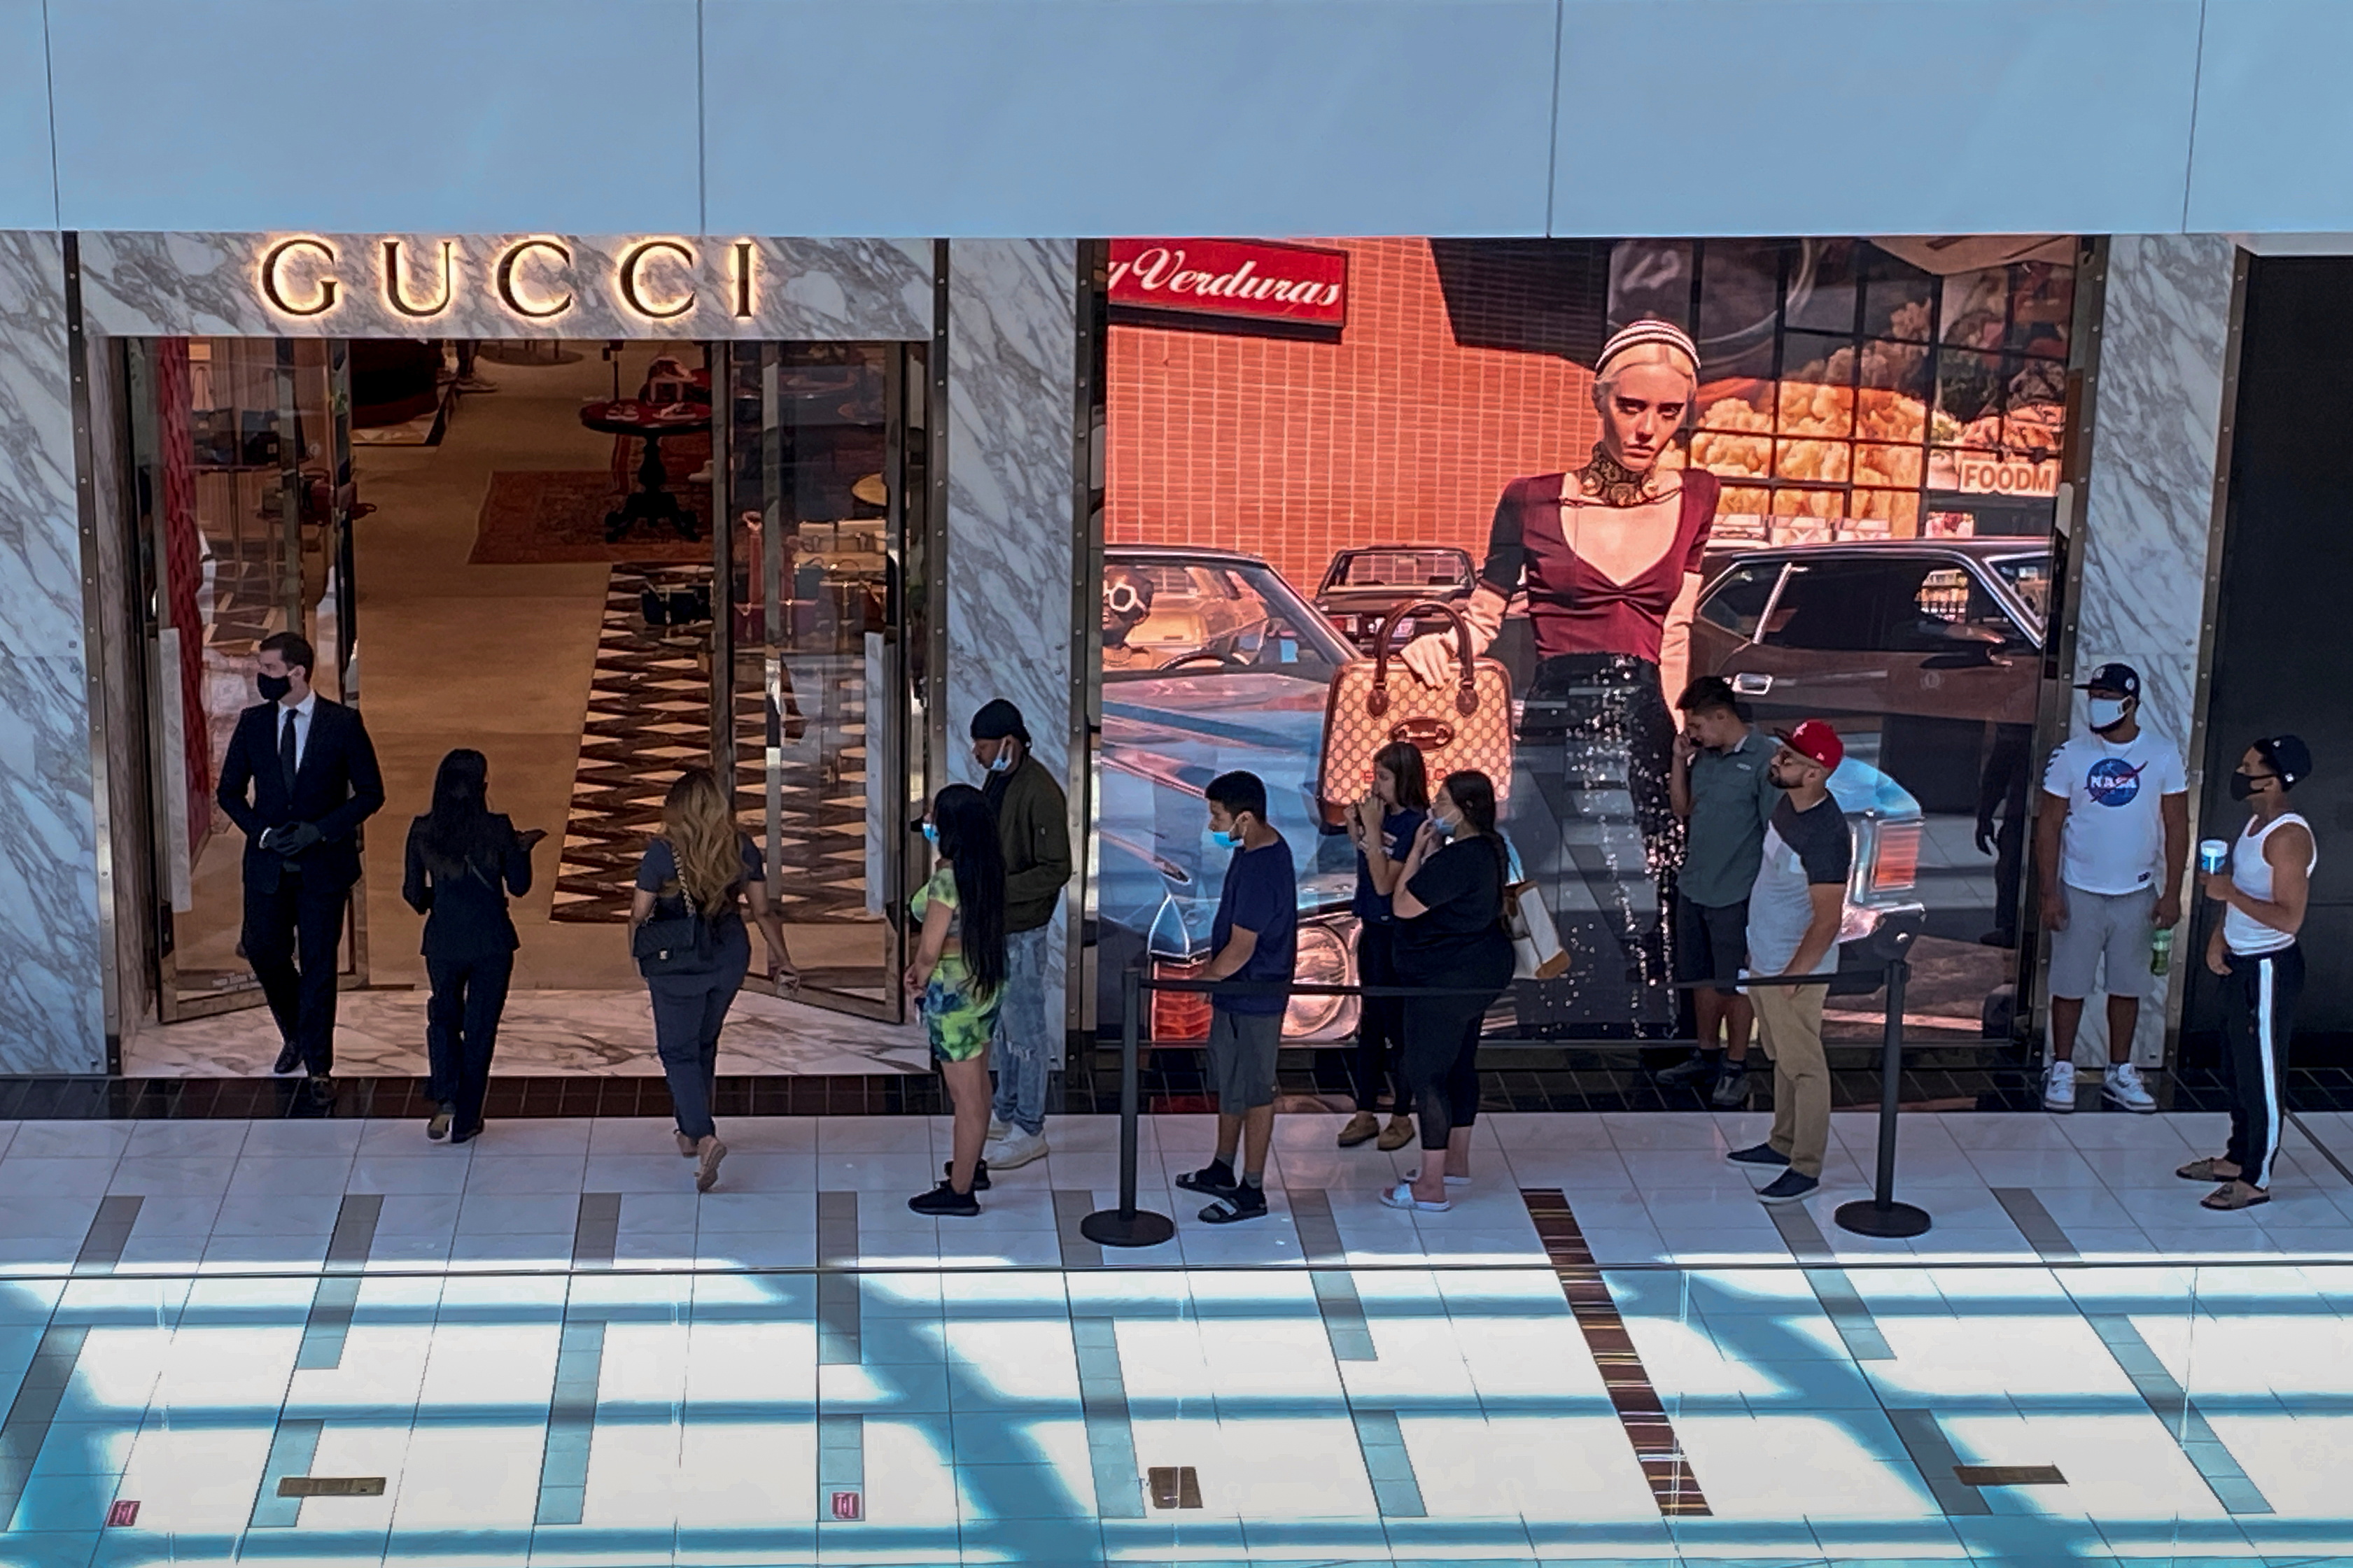 Customers line up to enter a Gucci fashion store at the The Galleria shopping mall after the mall opened during the coronavirus disease (COVID -19) outbreak in Houston